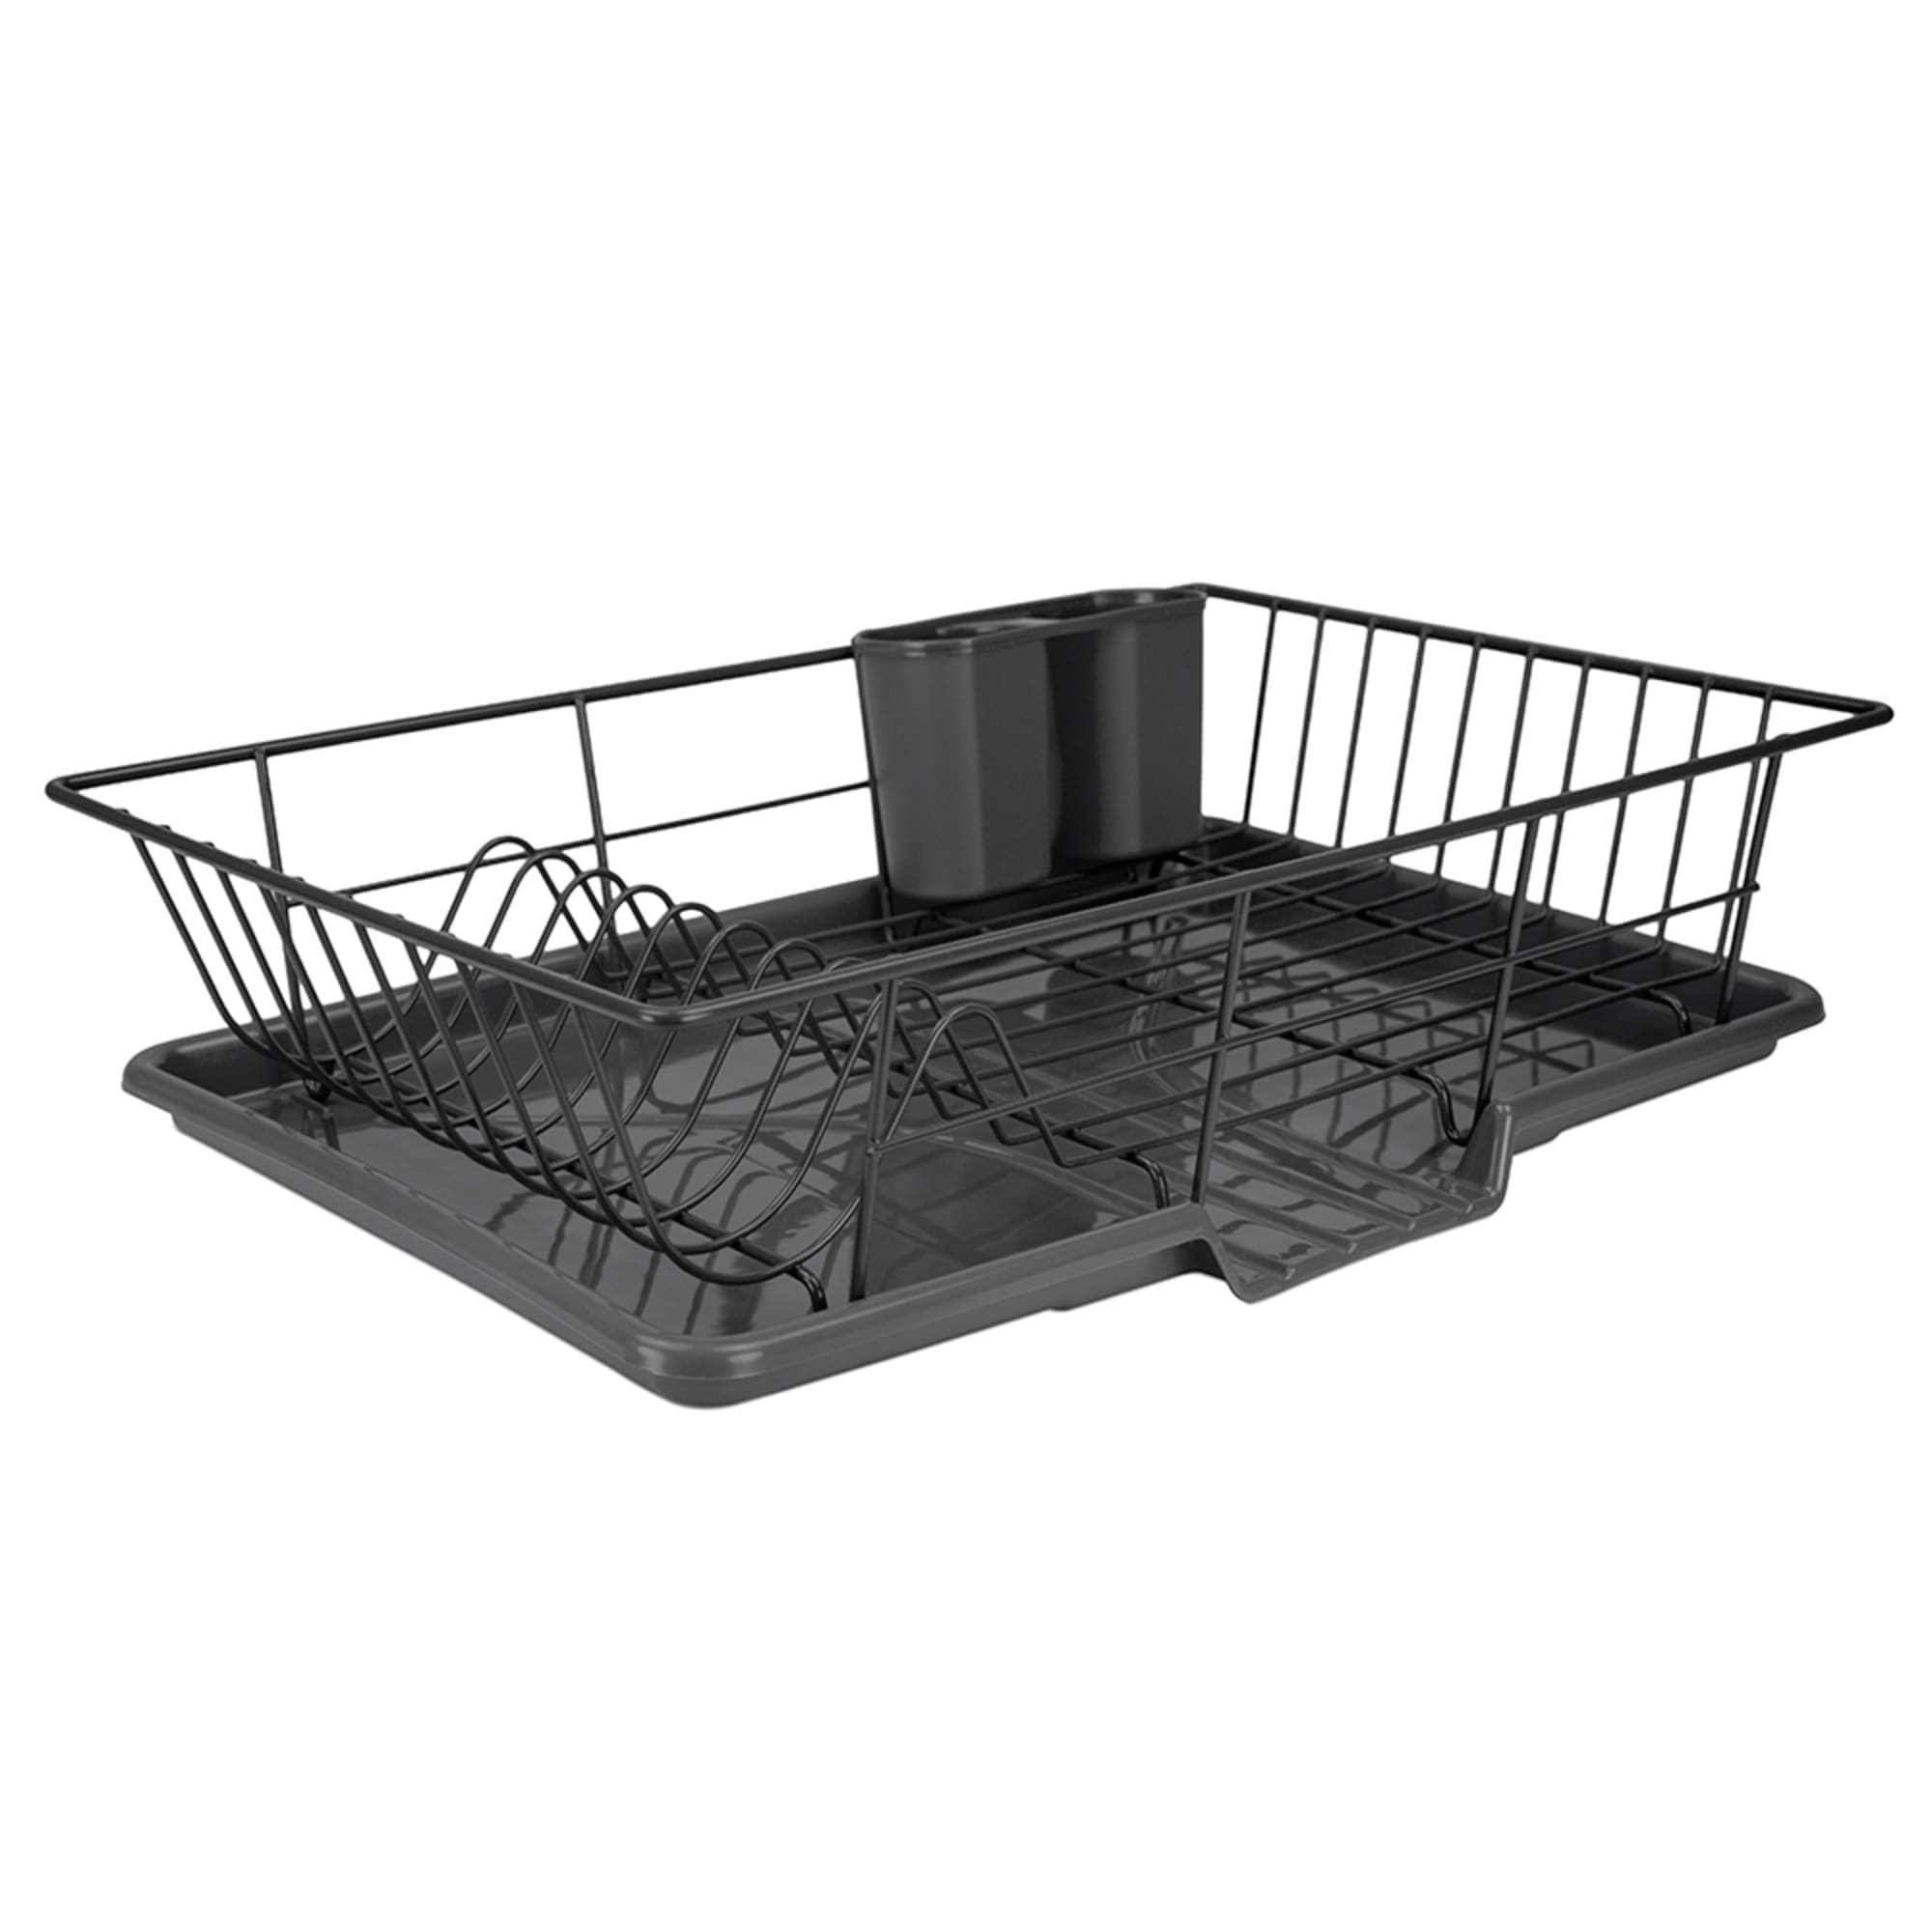 Home Basics 3 Piece  Vinyl Dish Drainer with Self-Draining Drip Tray, Black
 $10.00 EACH, CASE PACK OF 6